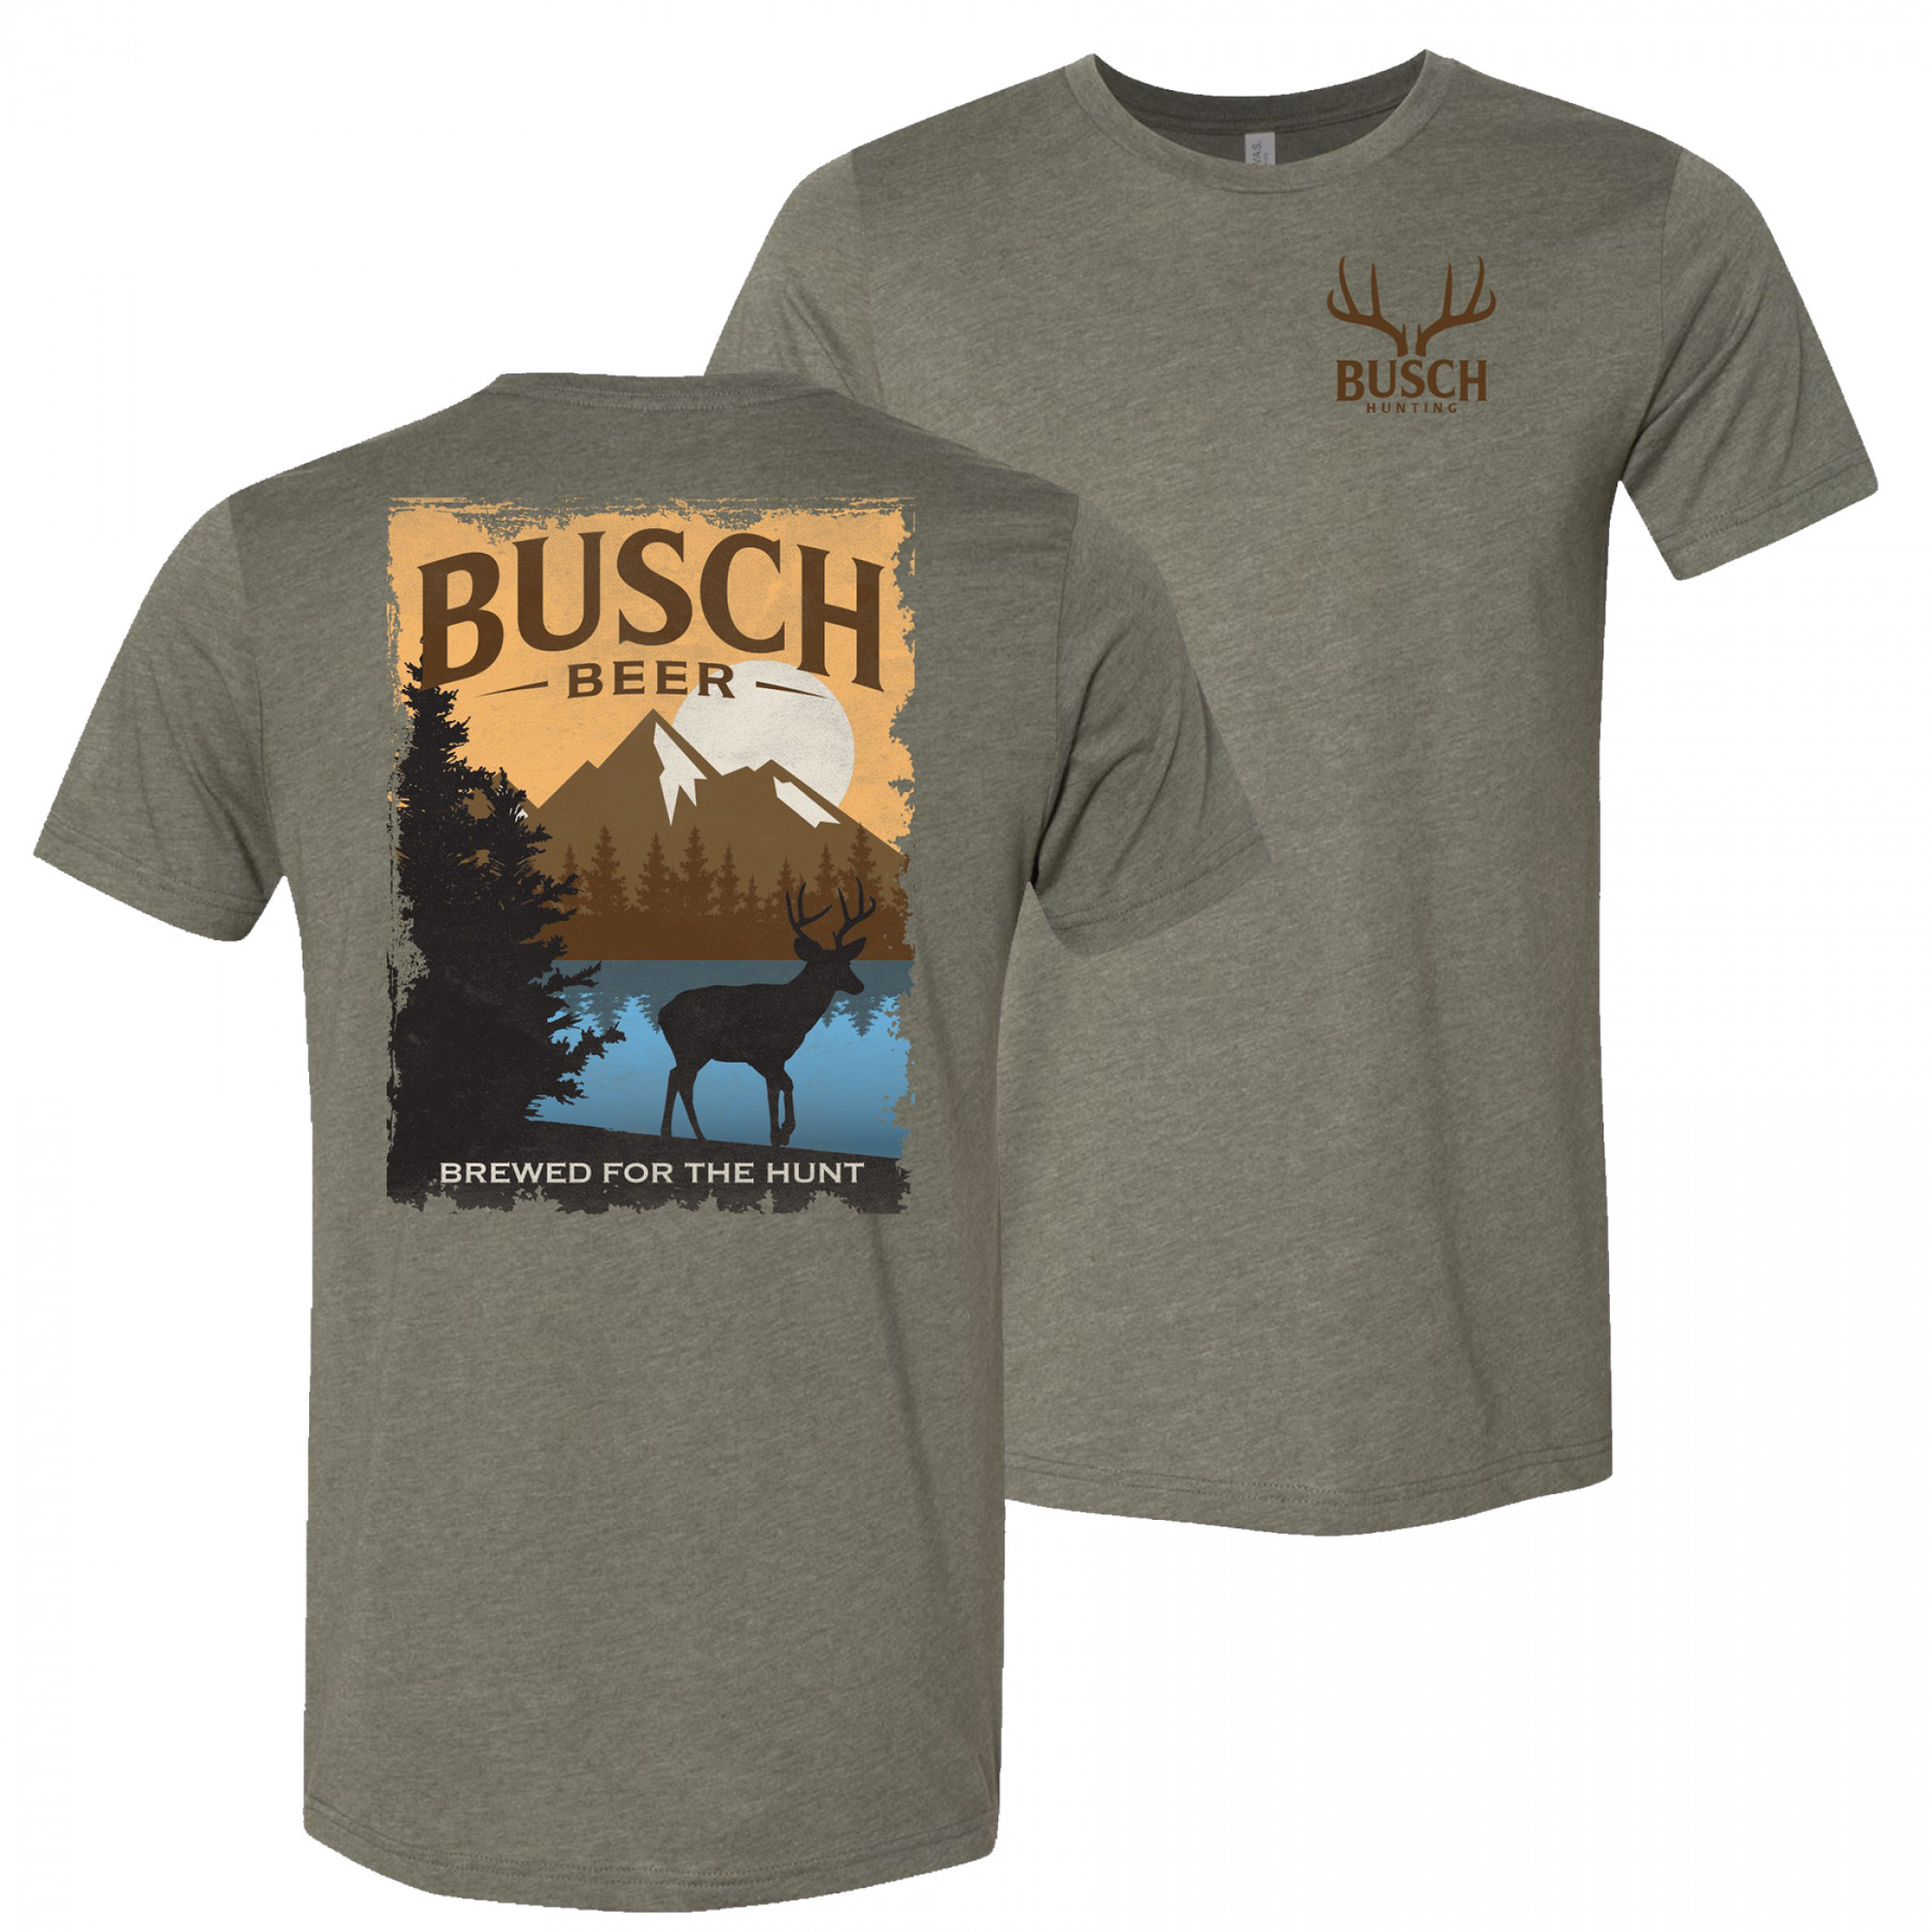 Busch Beer Brewed For The Hunt Front and Back Print T-Shirt